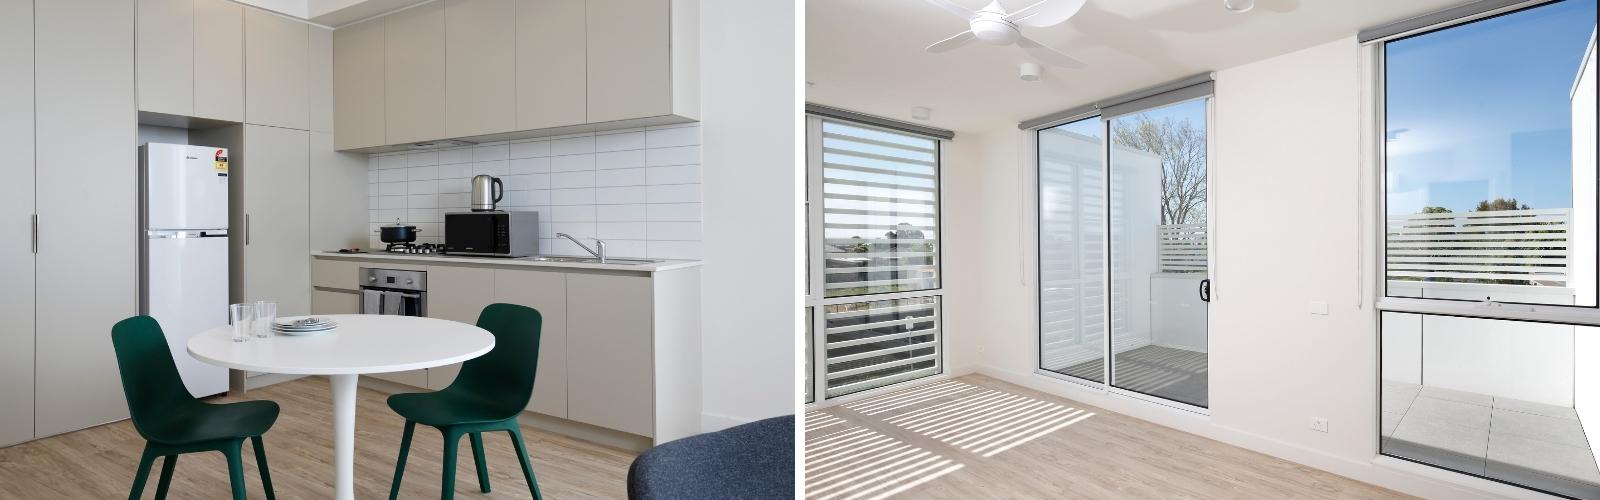 Photos of the interior of the self-contained apartments at the Market Road property in Werribee